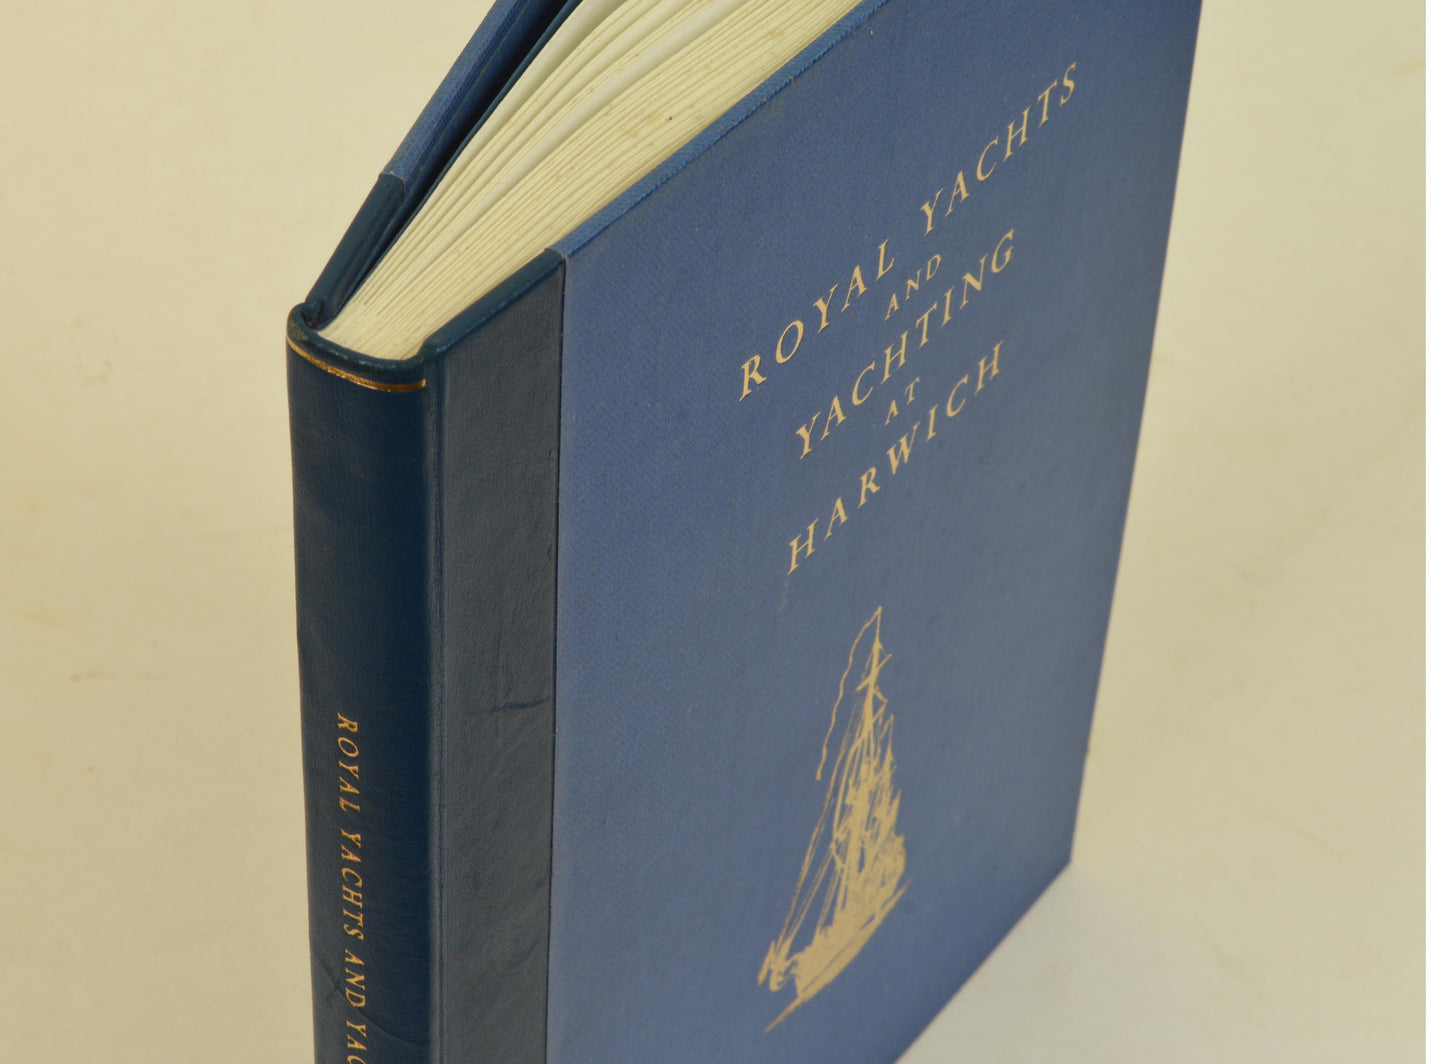 Royal Yachts and Yachting at Harwich, Limited Edition of 25, pub. 1958